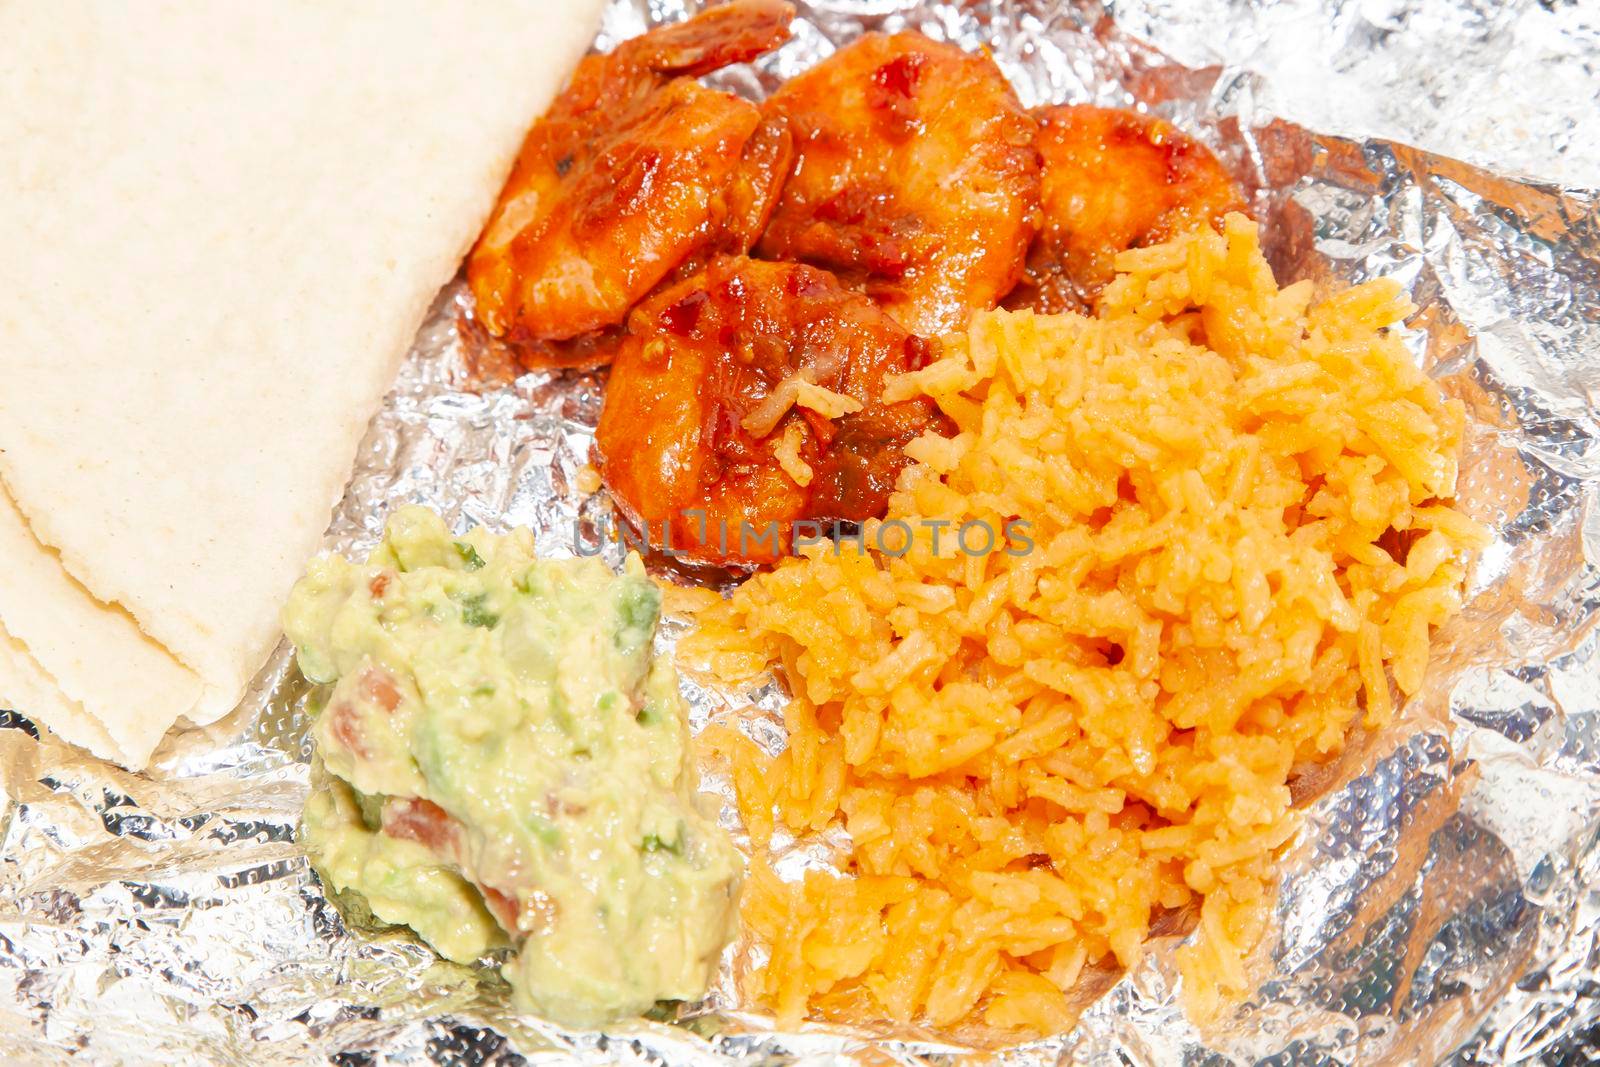 Spicy hot shrimp on foil next to folded corn tortillas, rice, and guacamole